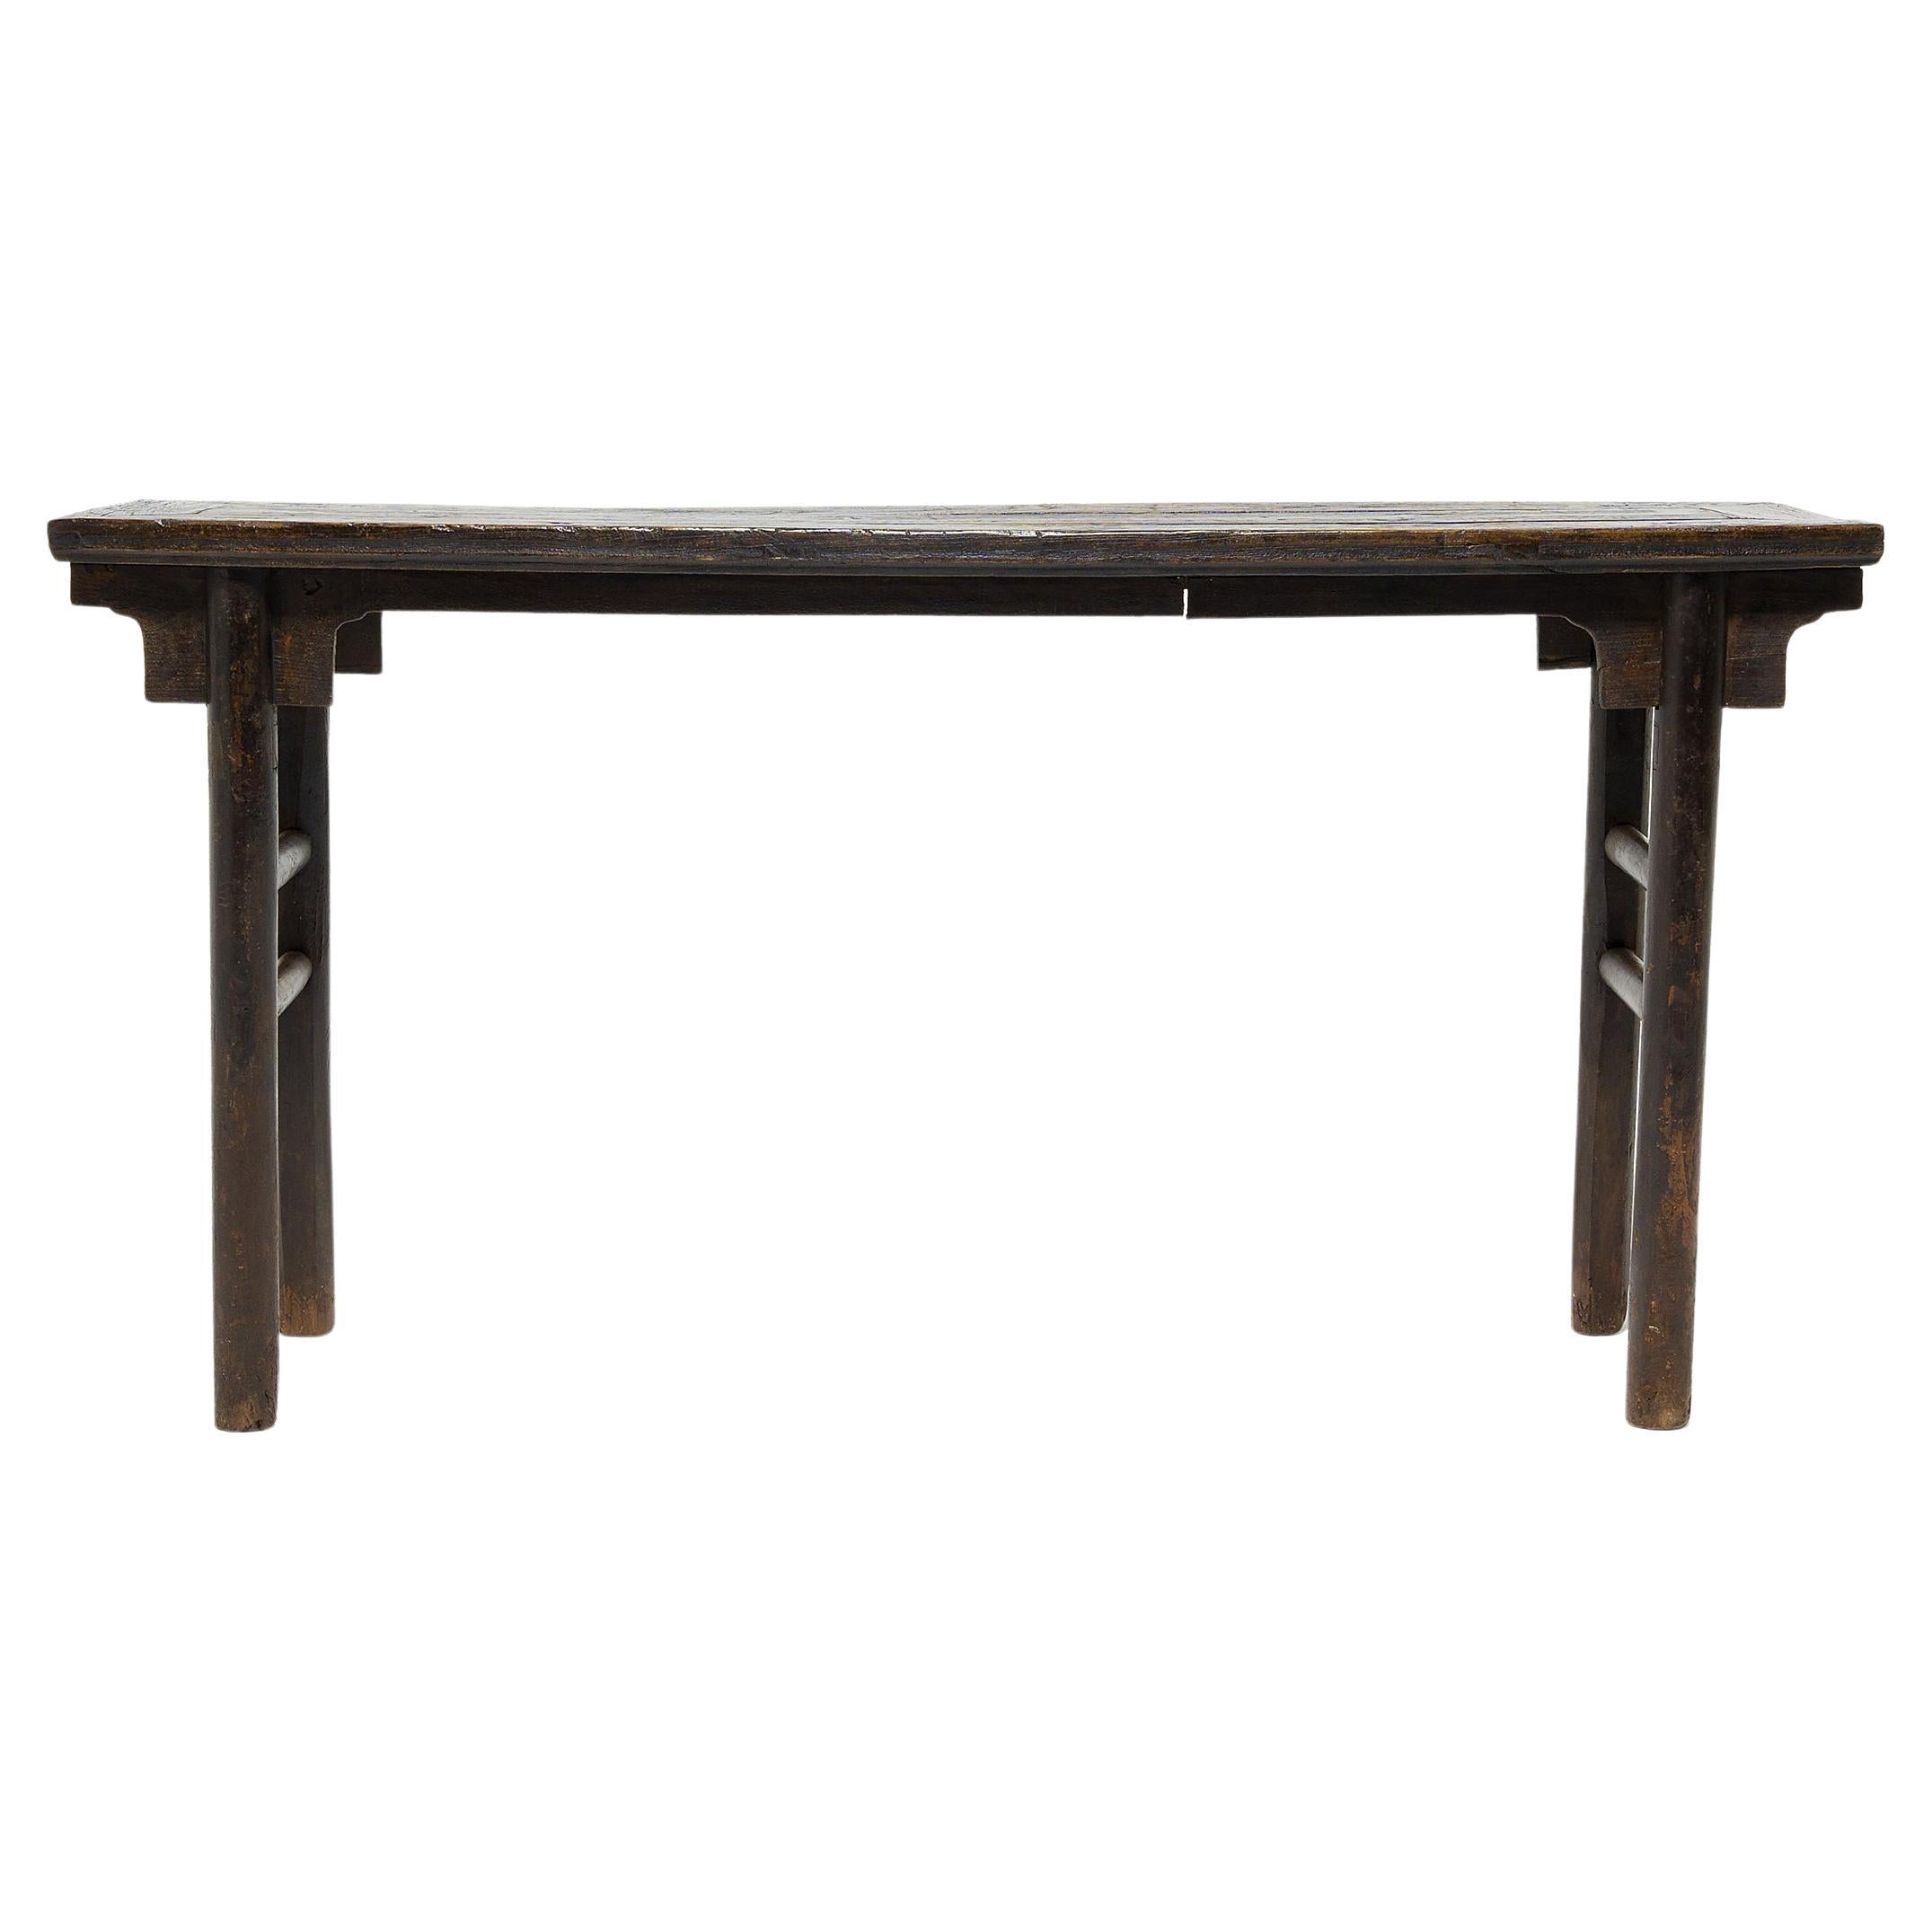 Chinese Round Leg Altar Table, c. 1800 For Sale